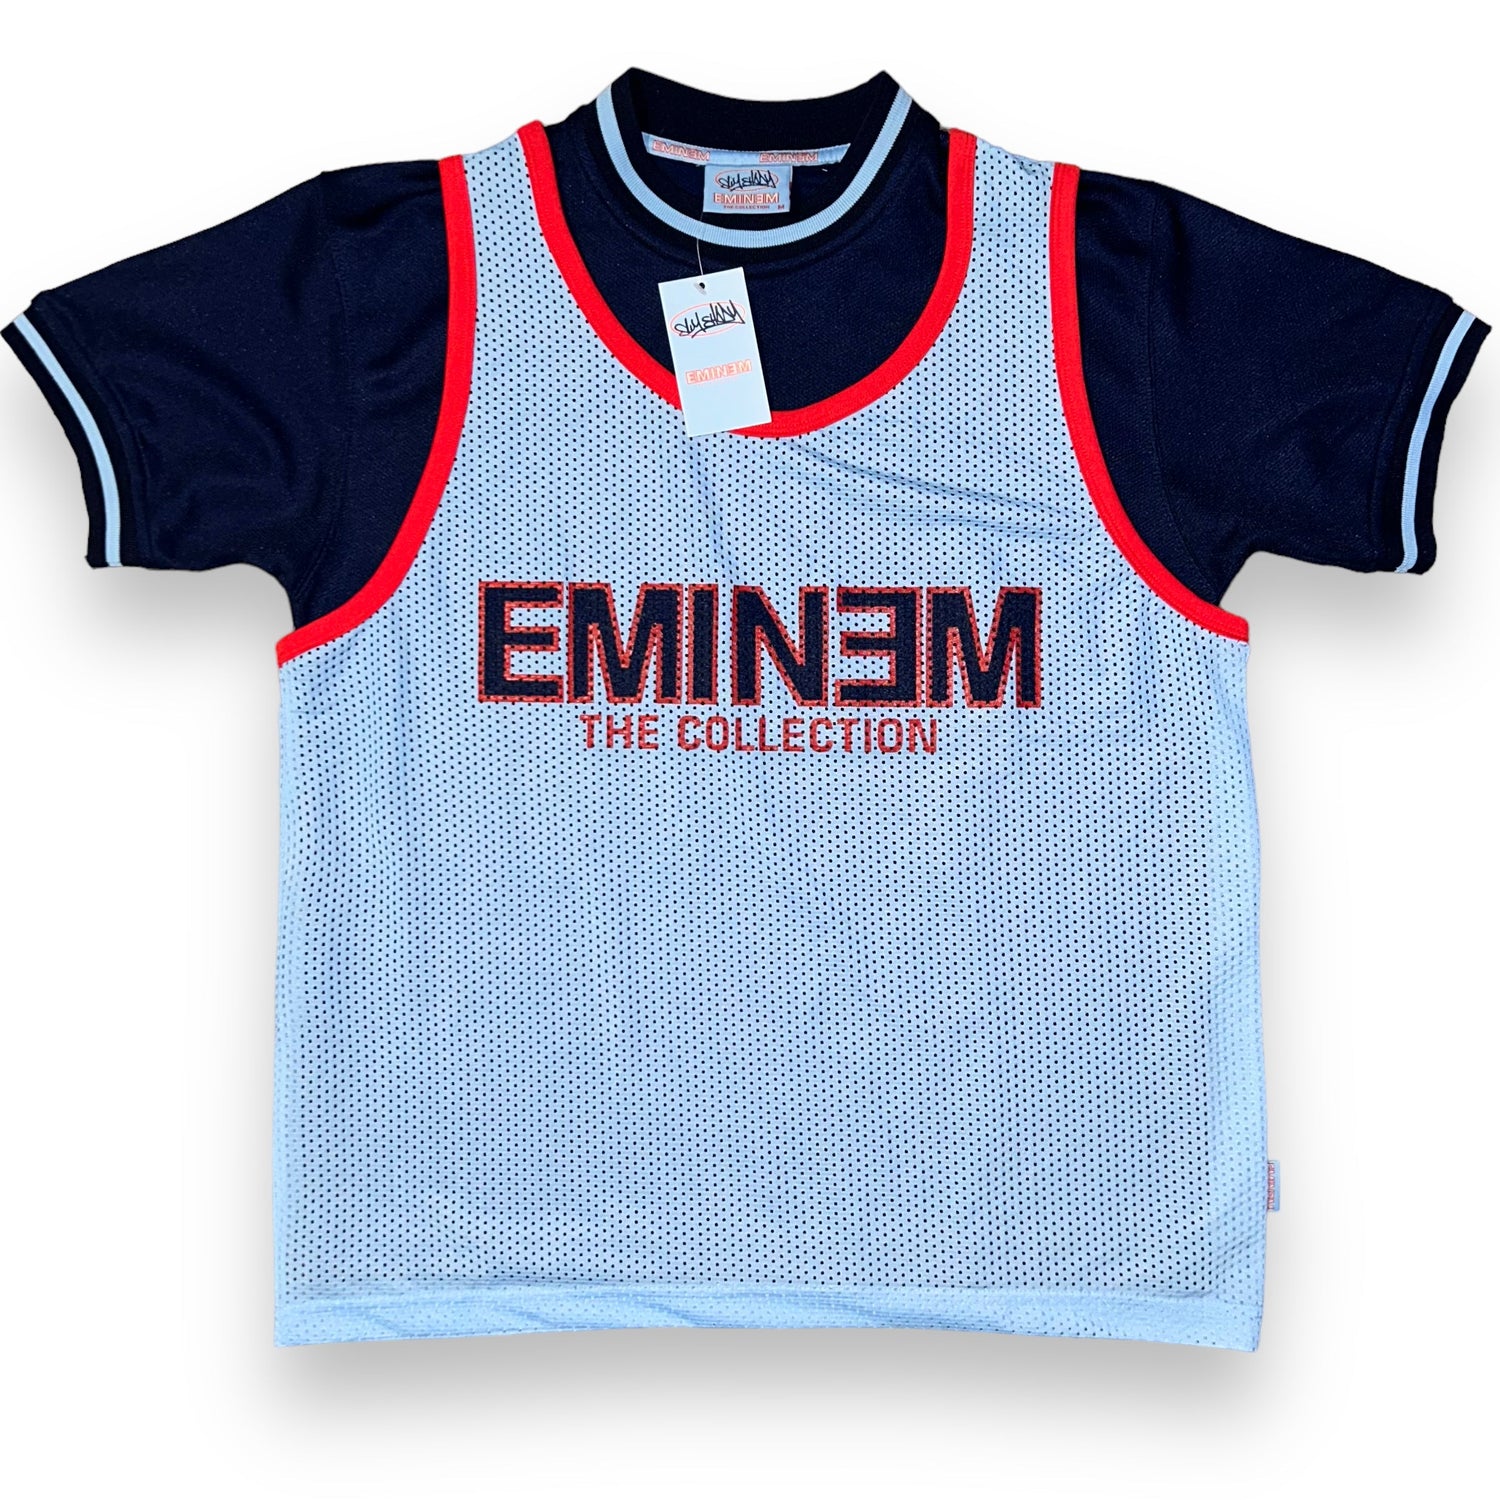 Jersey Slim Shady Eminem The Collection Vintage - oldstyleclothing